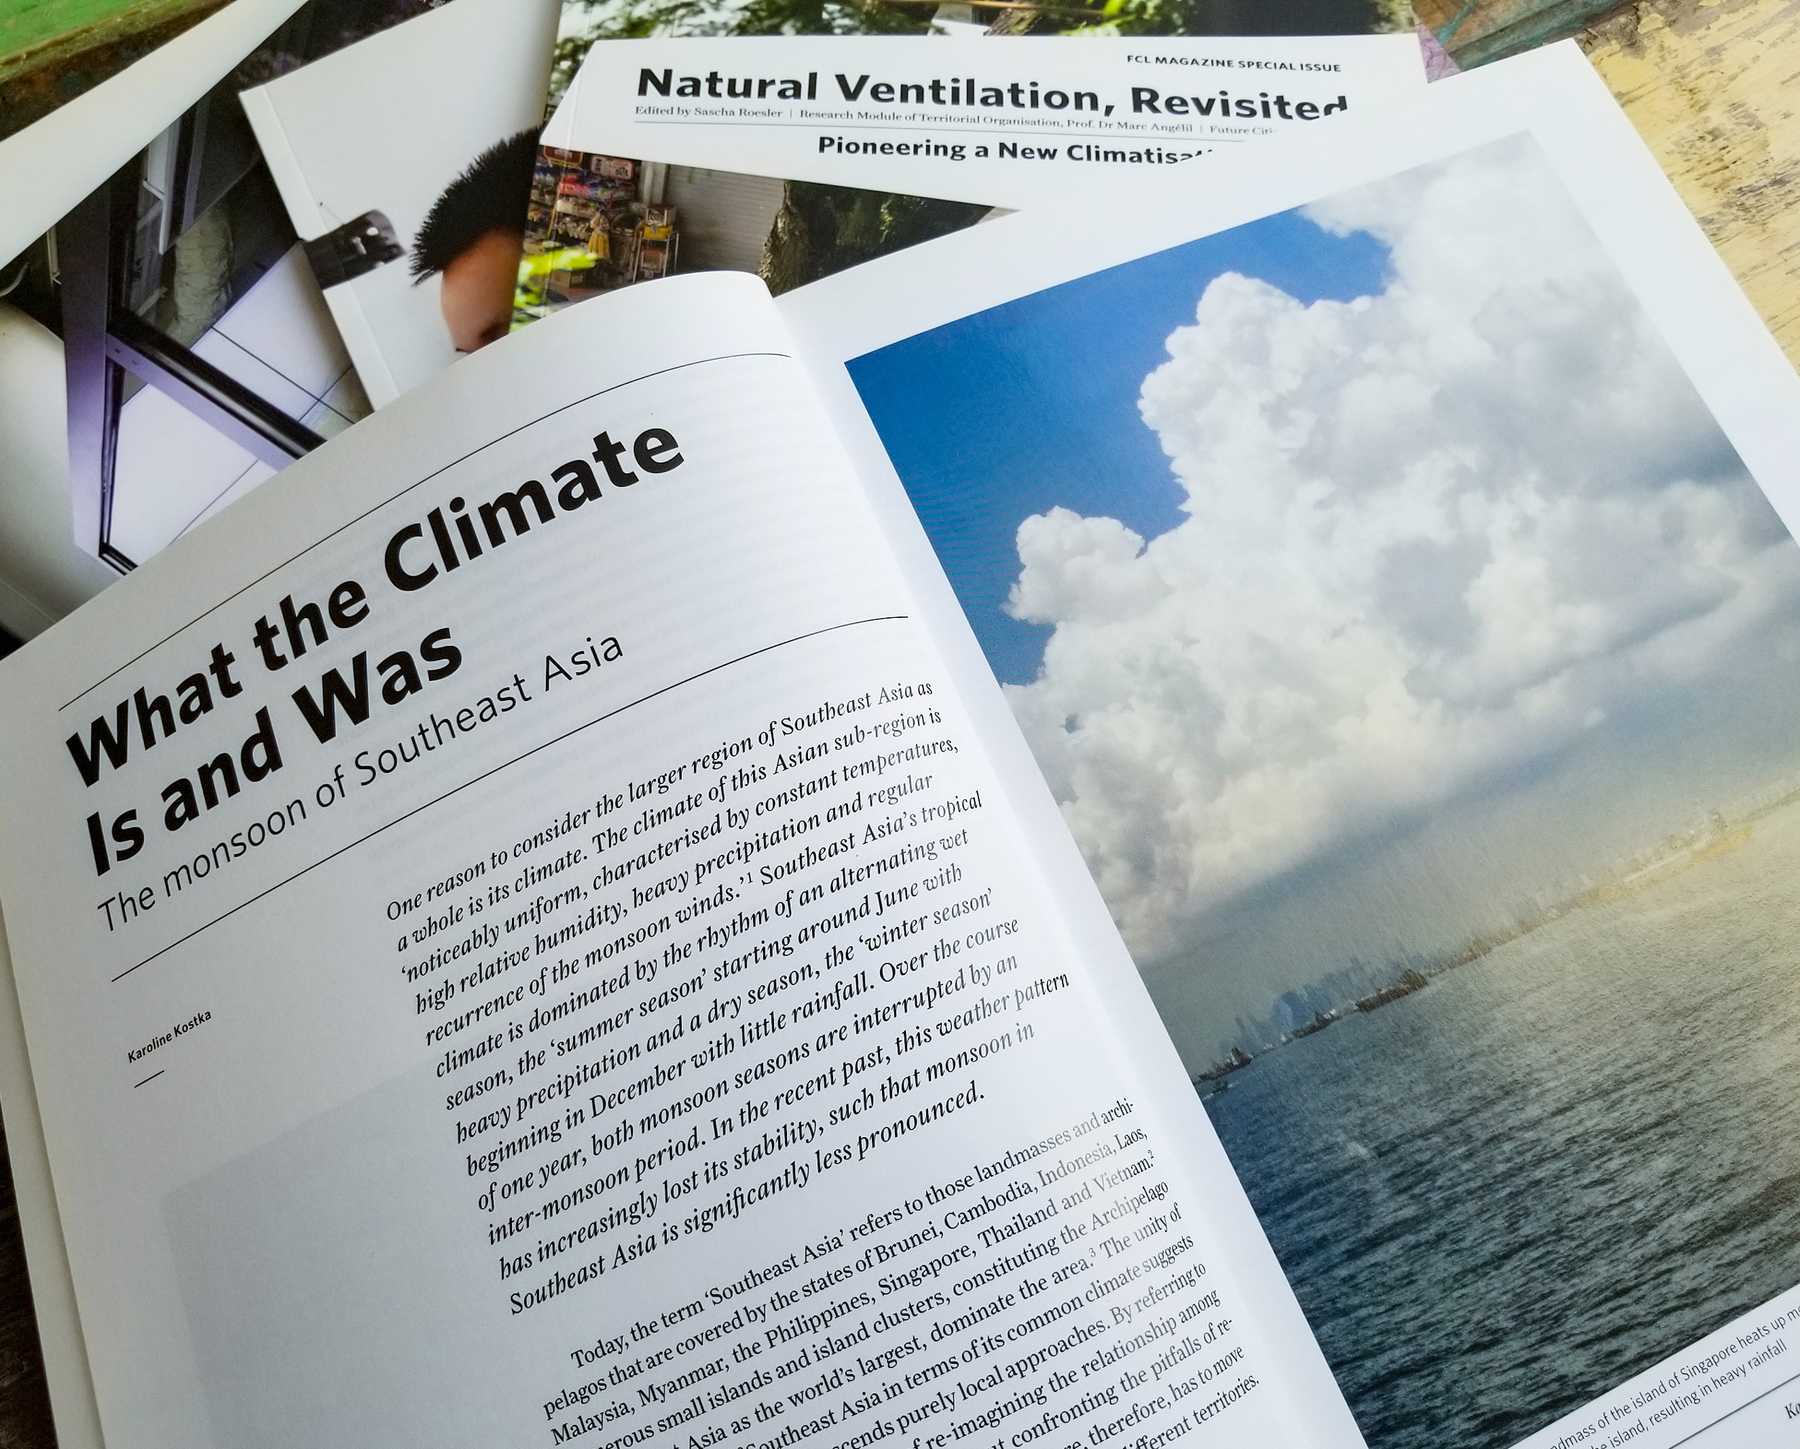 FCM foto of the article what the climate